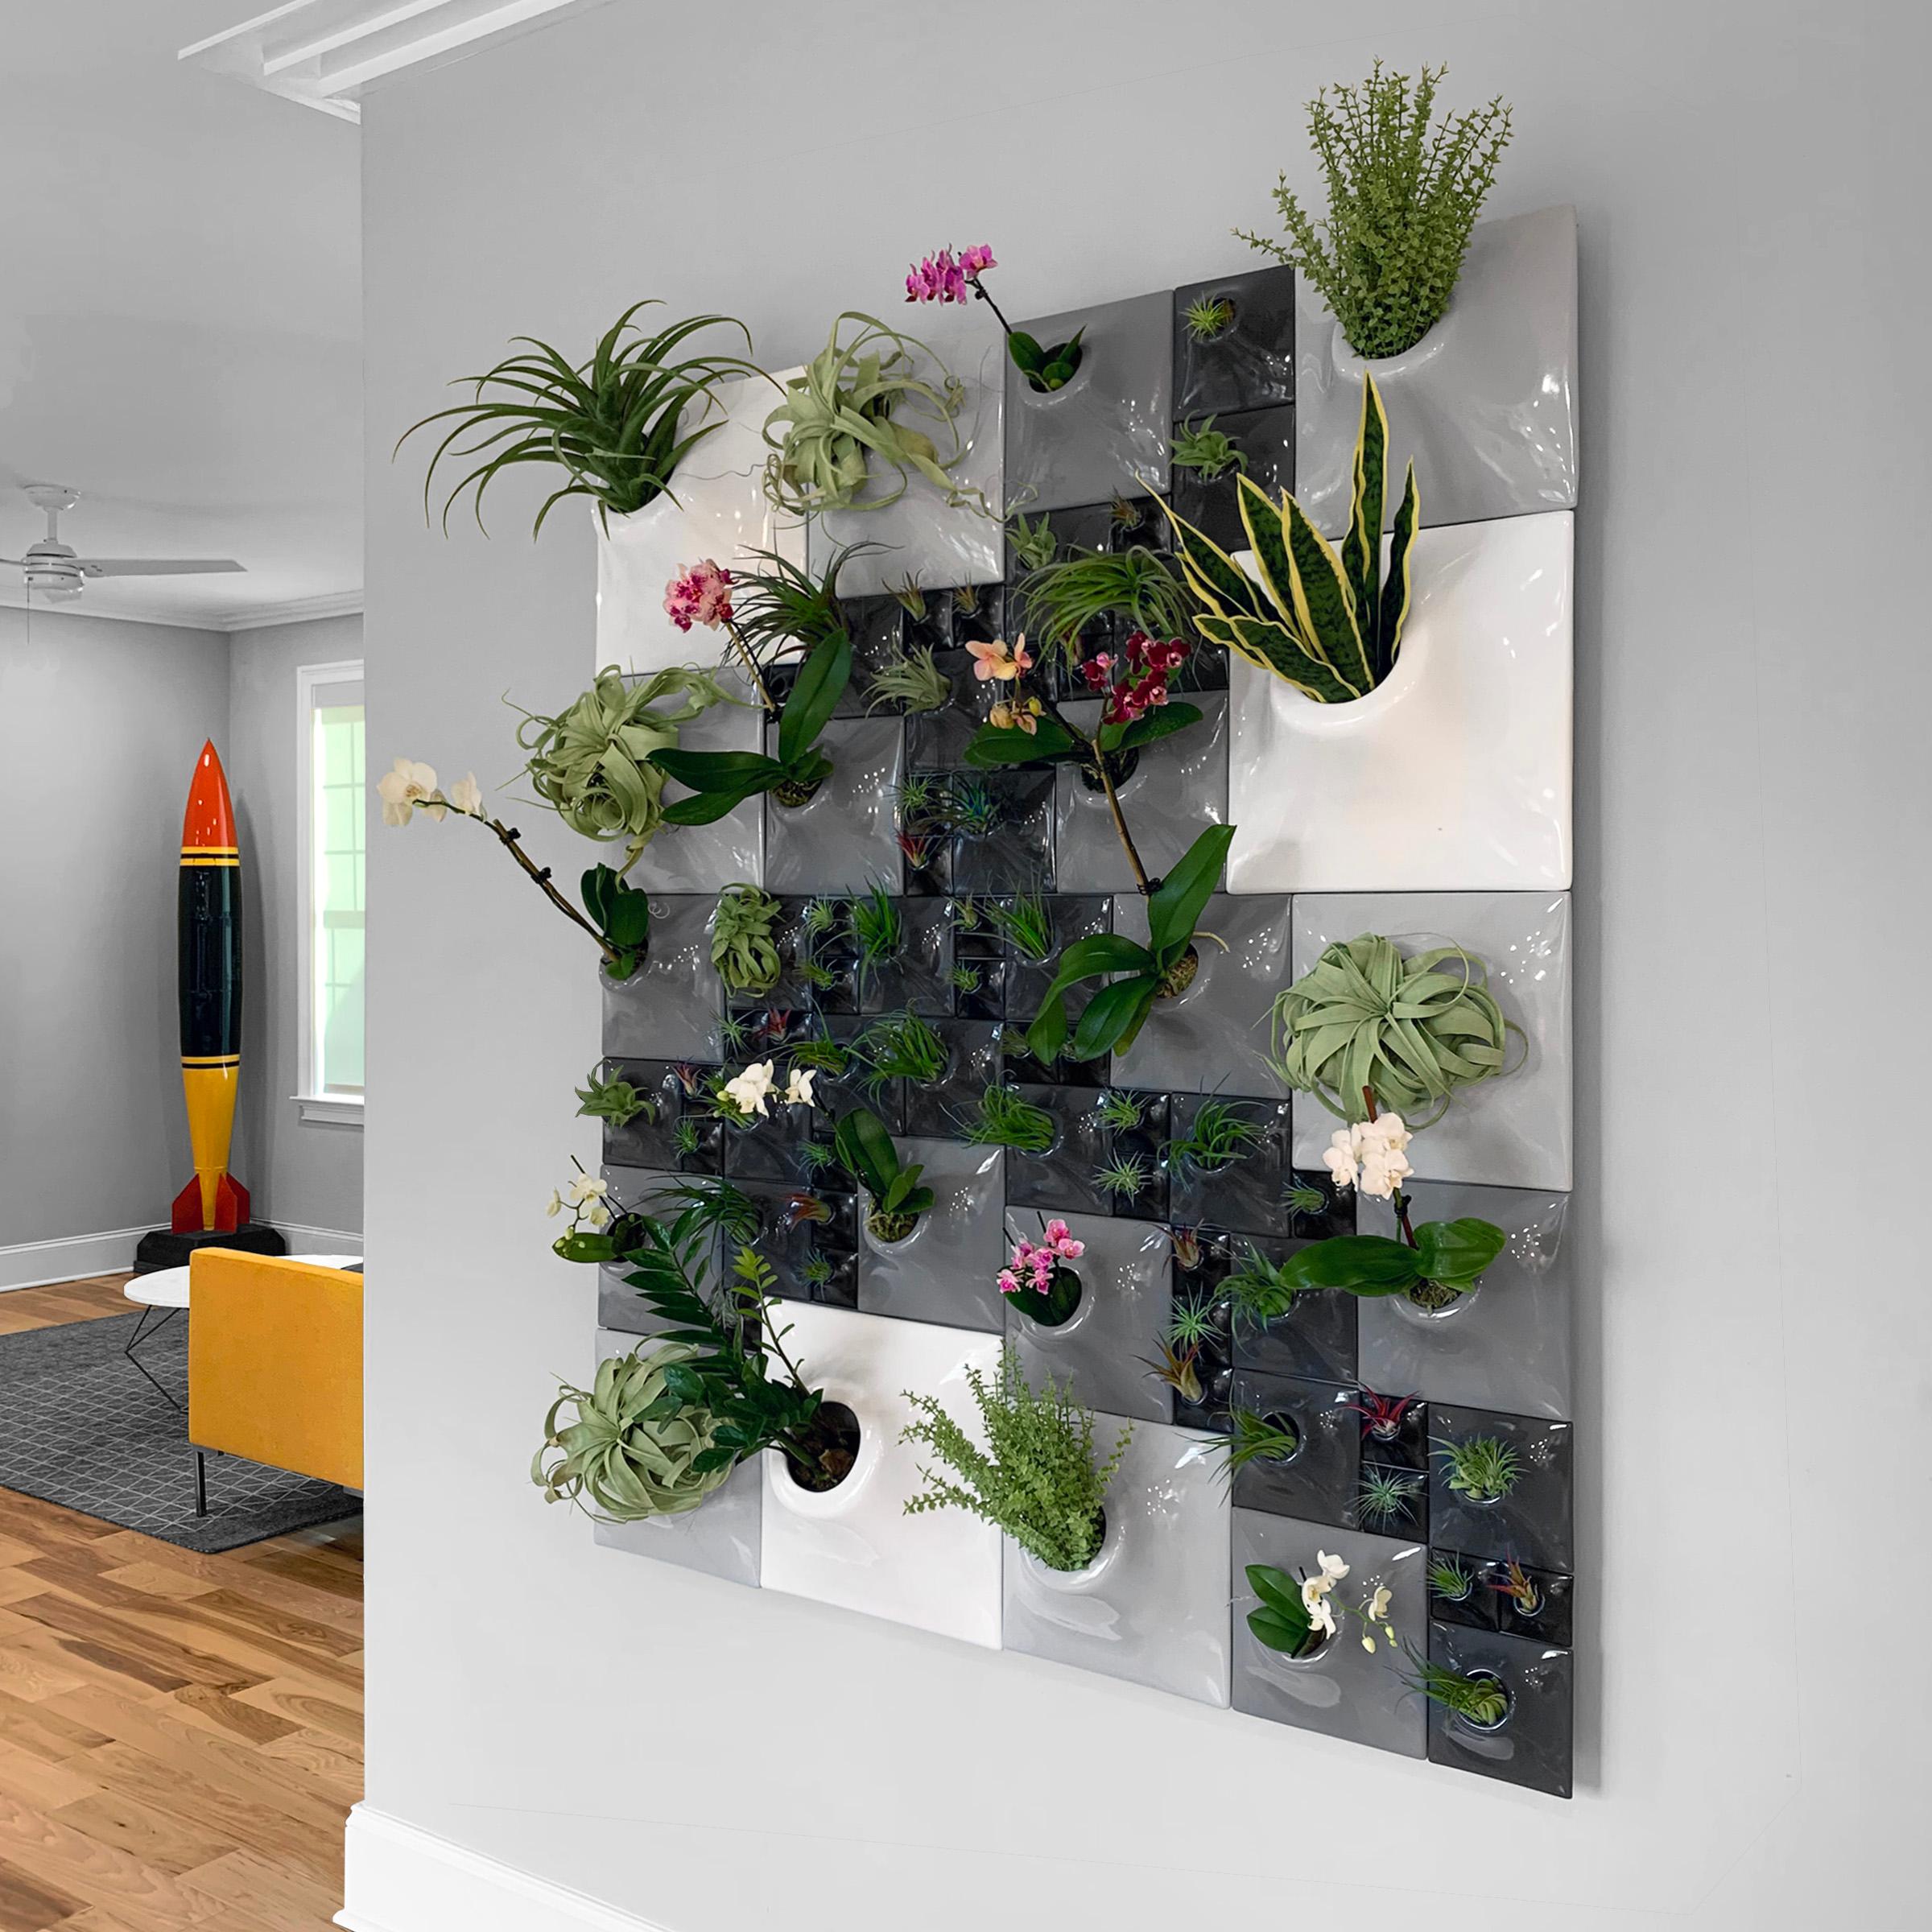 Introducing the next level of living wall!  Create your own undulating sculptural greenwall in your home, restaurant, or office.  Dazzle your senses with this dynamic experiential living wall decor and add some excitement and modern design to any